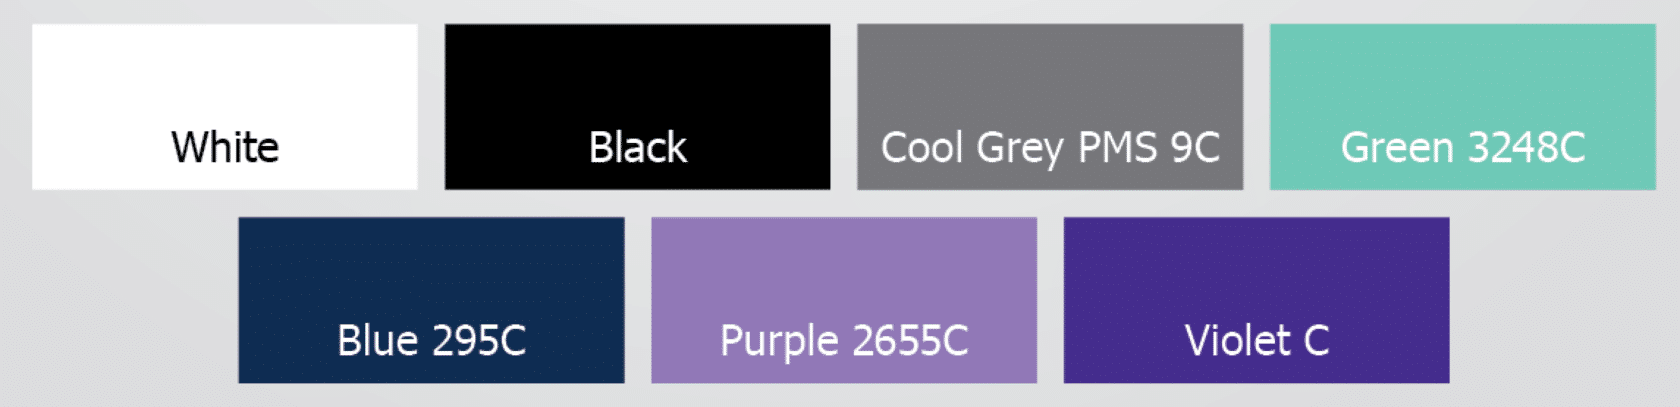 Color swatches of white, black, cool grey PMS 9C, Green 3248C, Blue 295C, Purple 2655C, and Violet C.